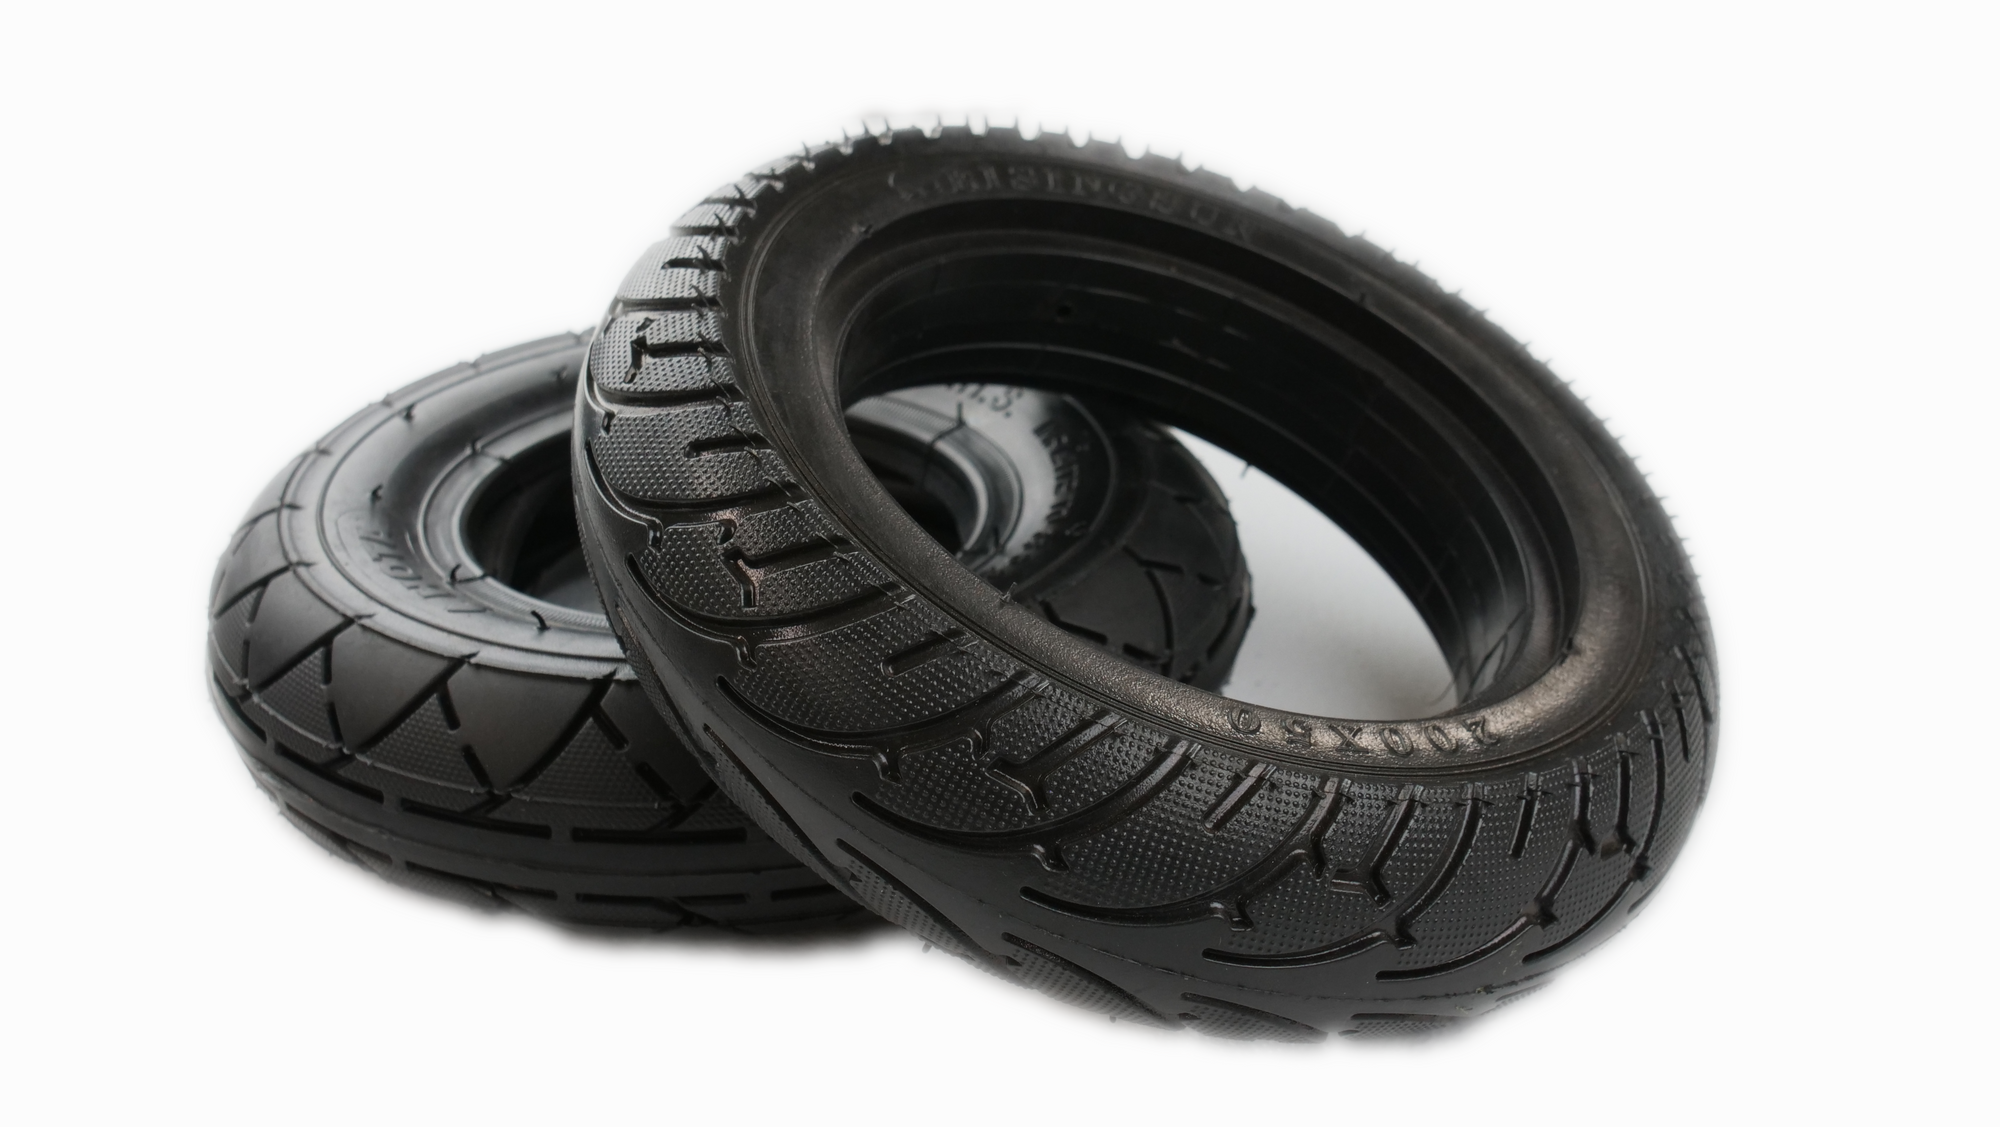 8" Rear Solid Tire for EMOVE Touring